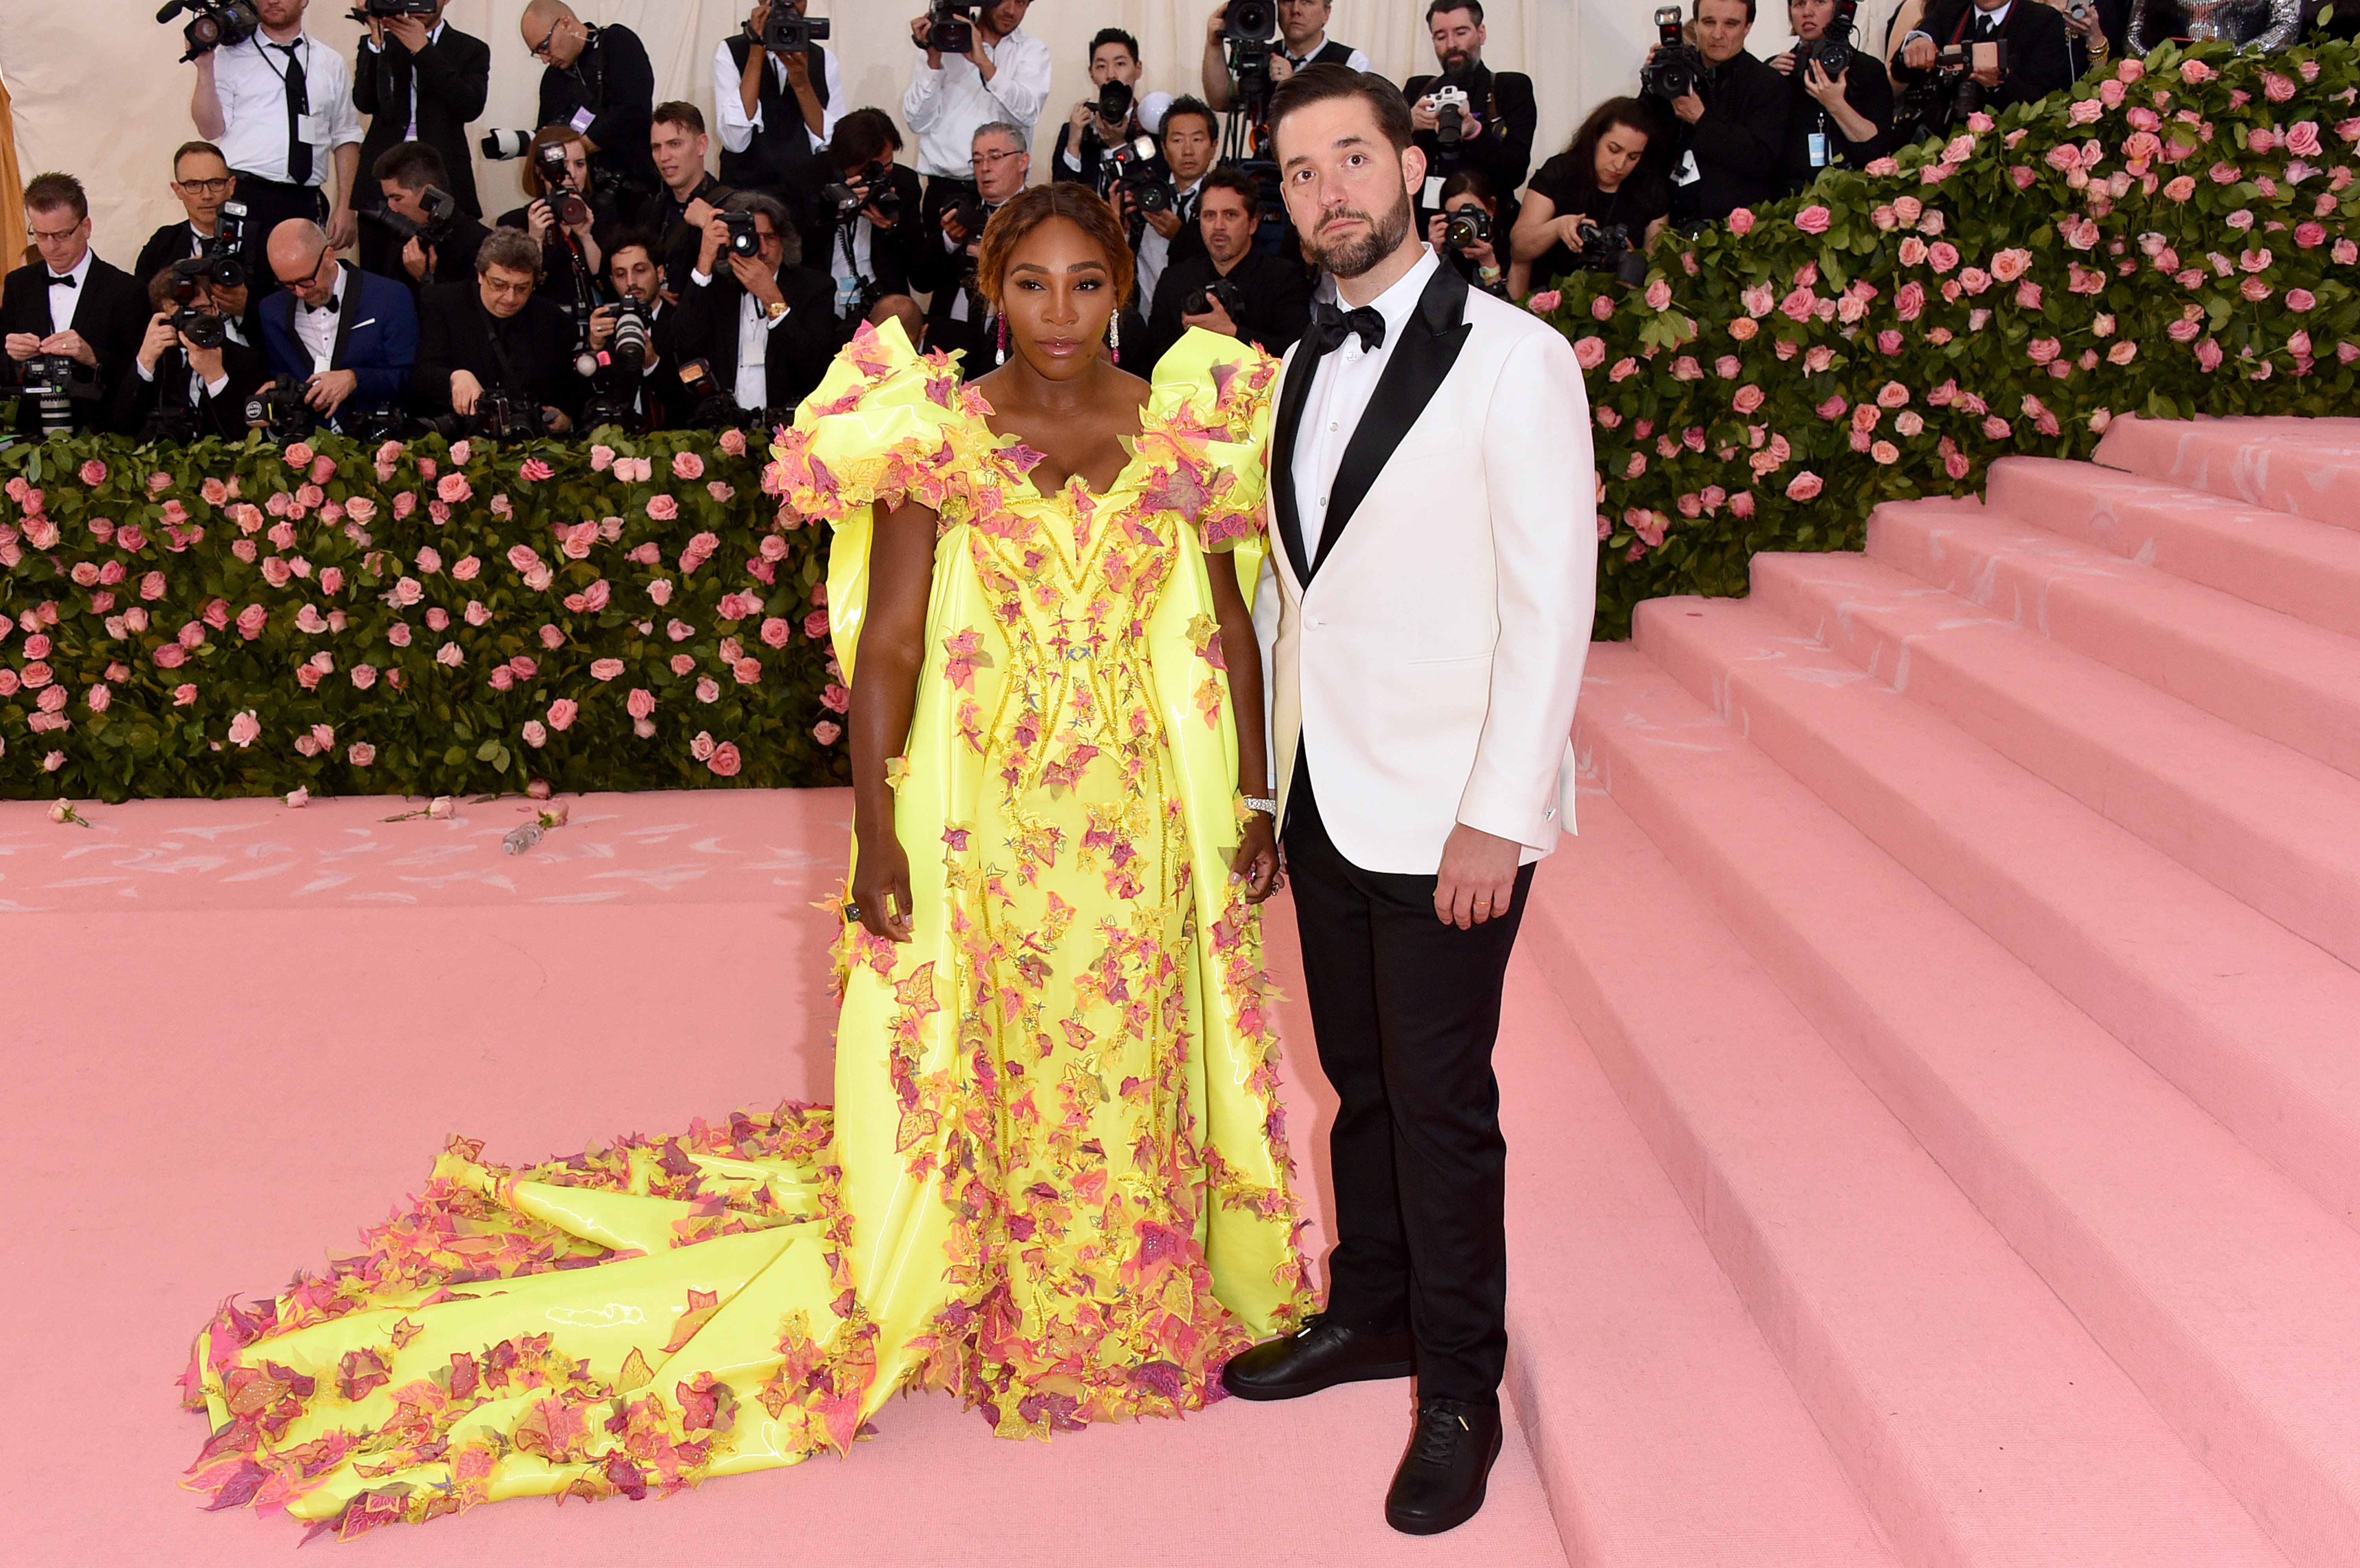 Serena Williams & Alexis Ohanian at The Met Gala in New York City on May 06, 2019 | Photo: Getty Images